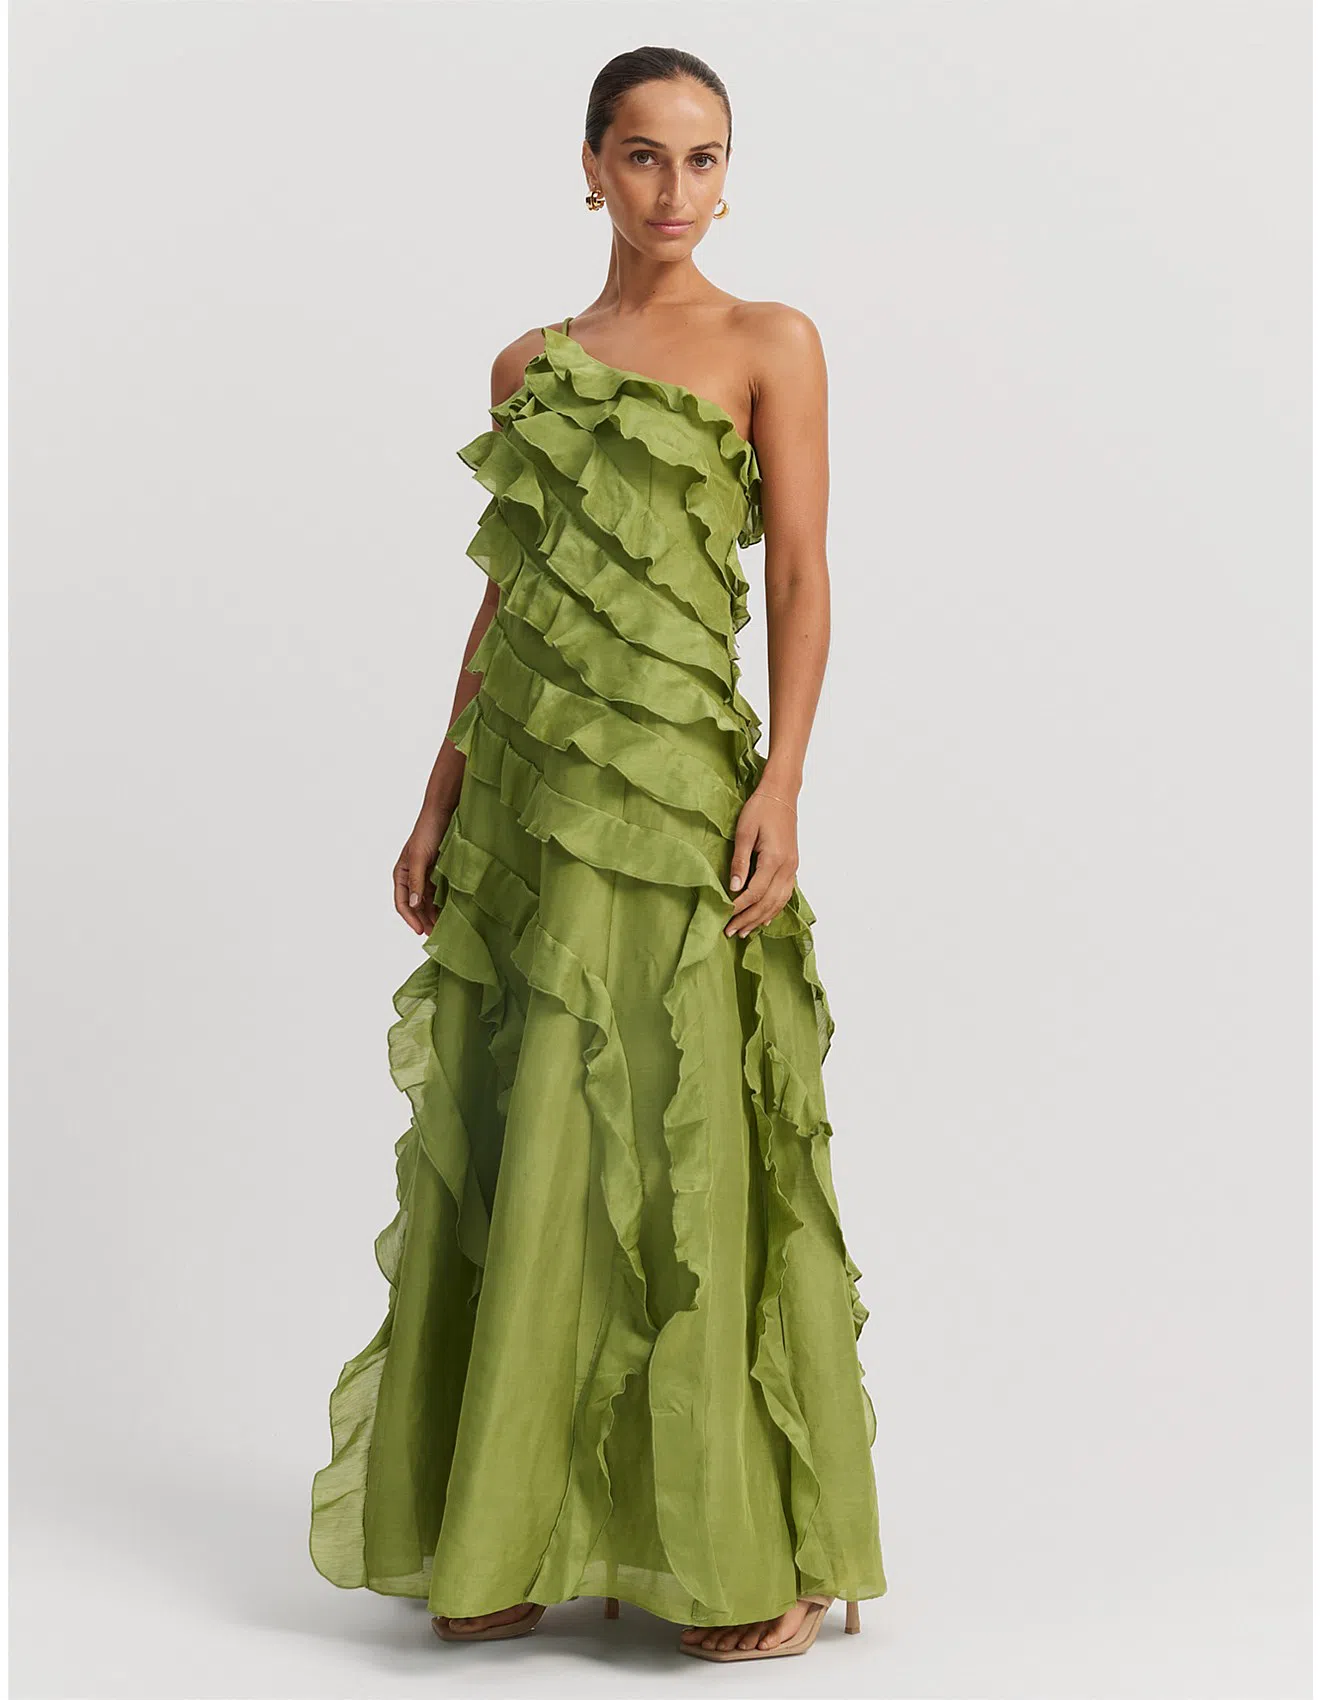 Country Road Cactus Ruffle Maxi Dress Green Size 4 | The Volte